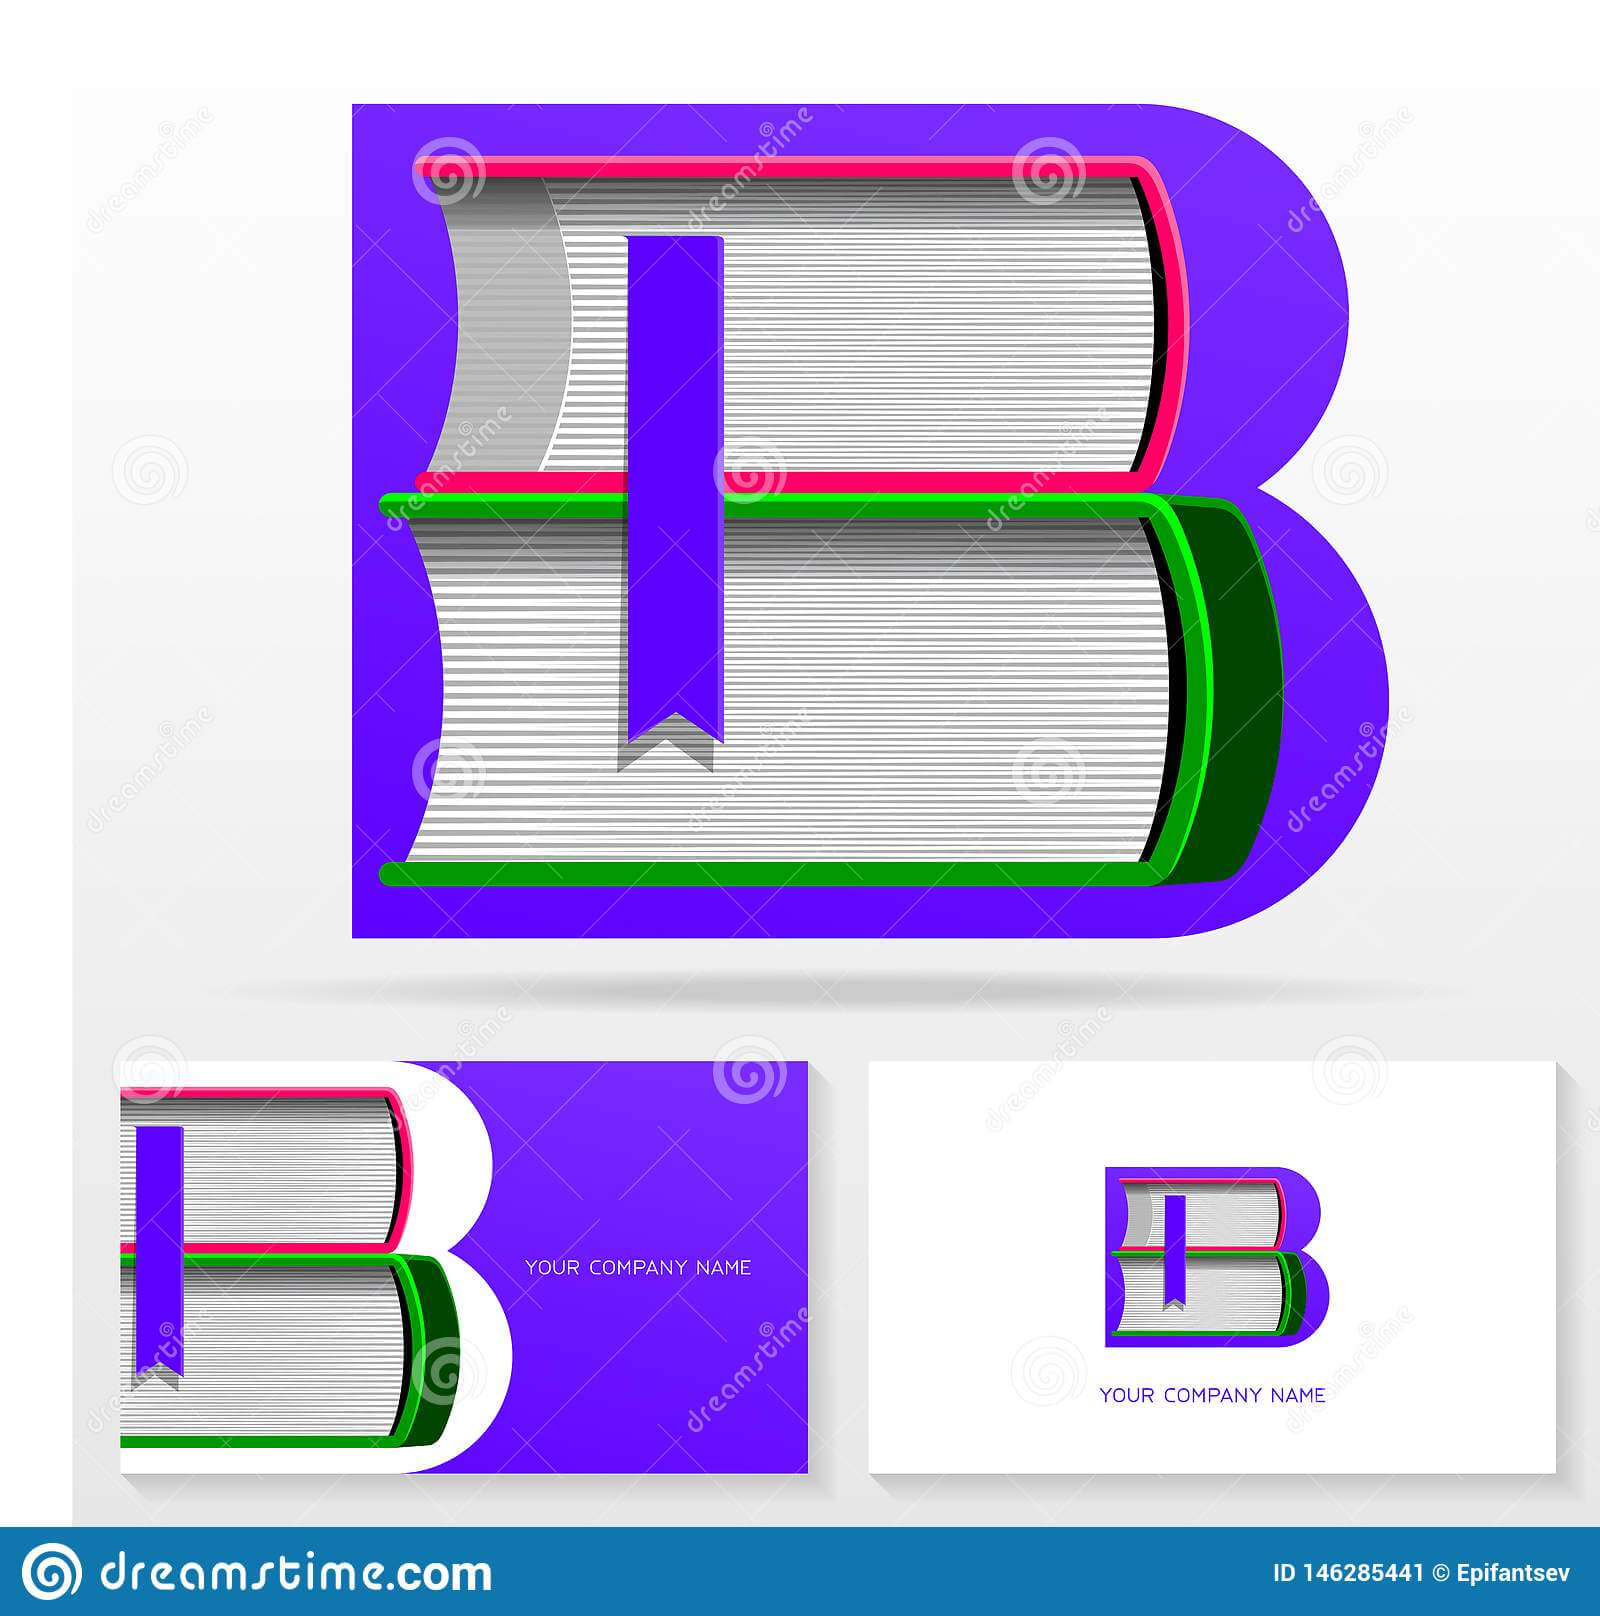 Letter B Logo Design Template. Letter B Made Of Books With Library Catalog Card Template